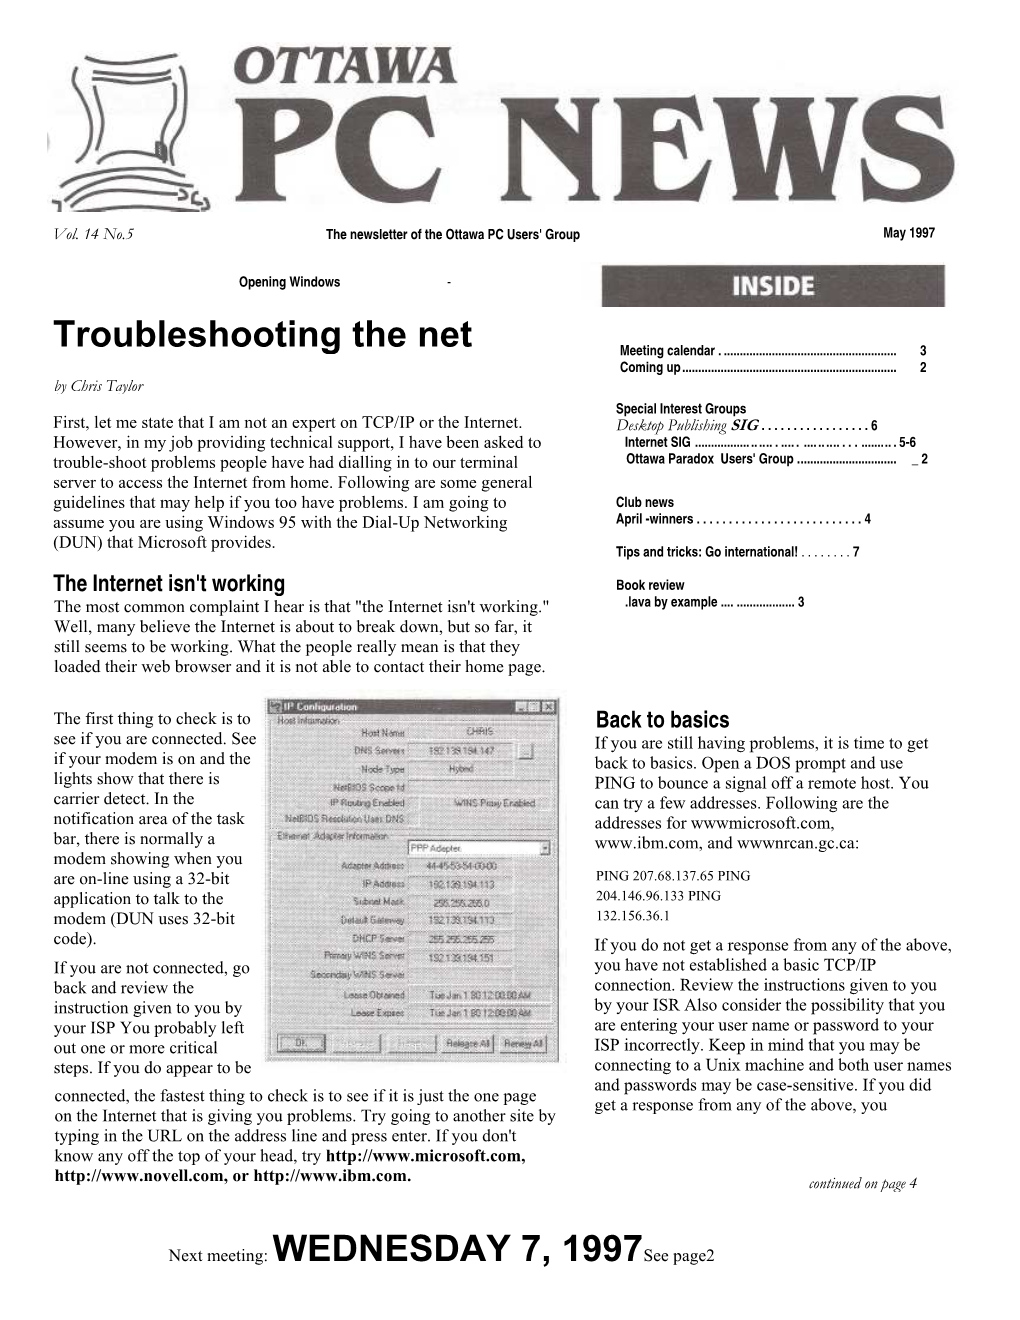 Troubleshooting the Net Next Meeting: WEDNESDAY 7, 1997See Page2